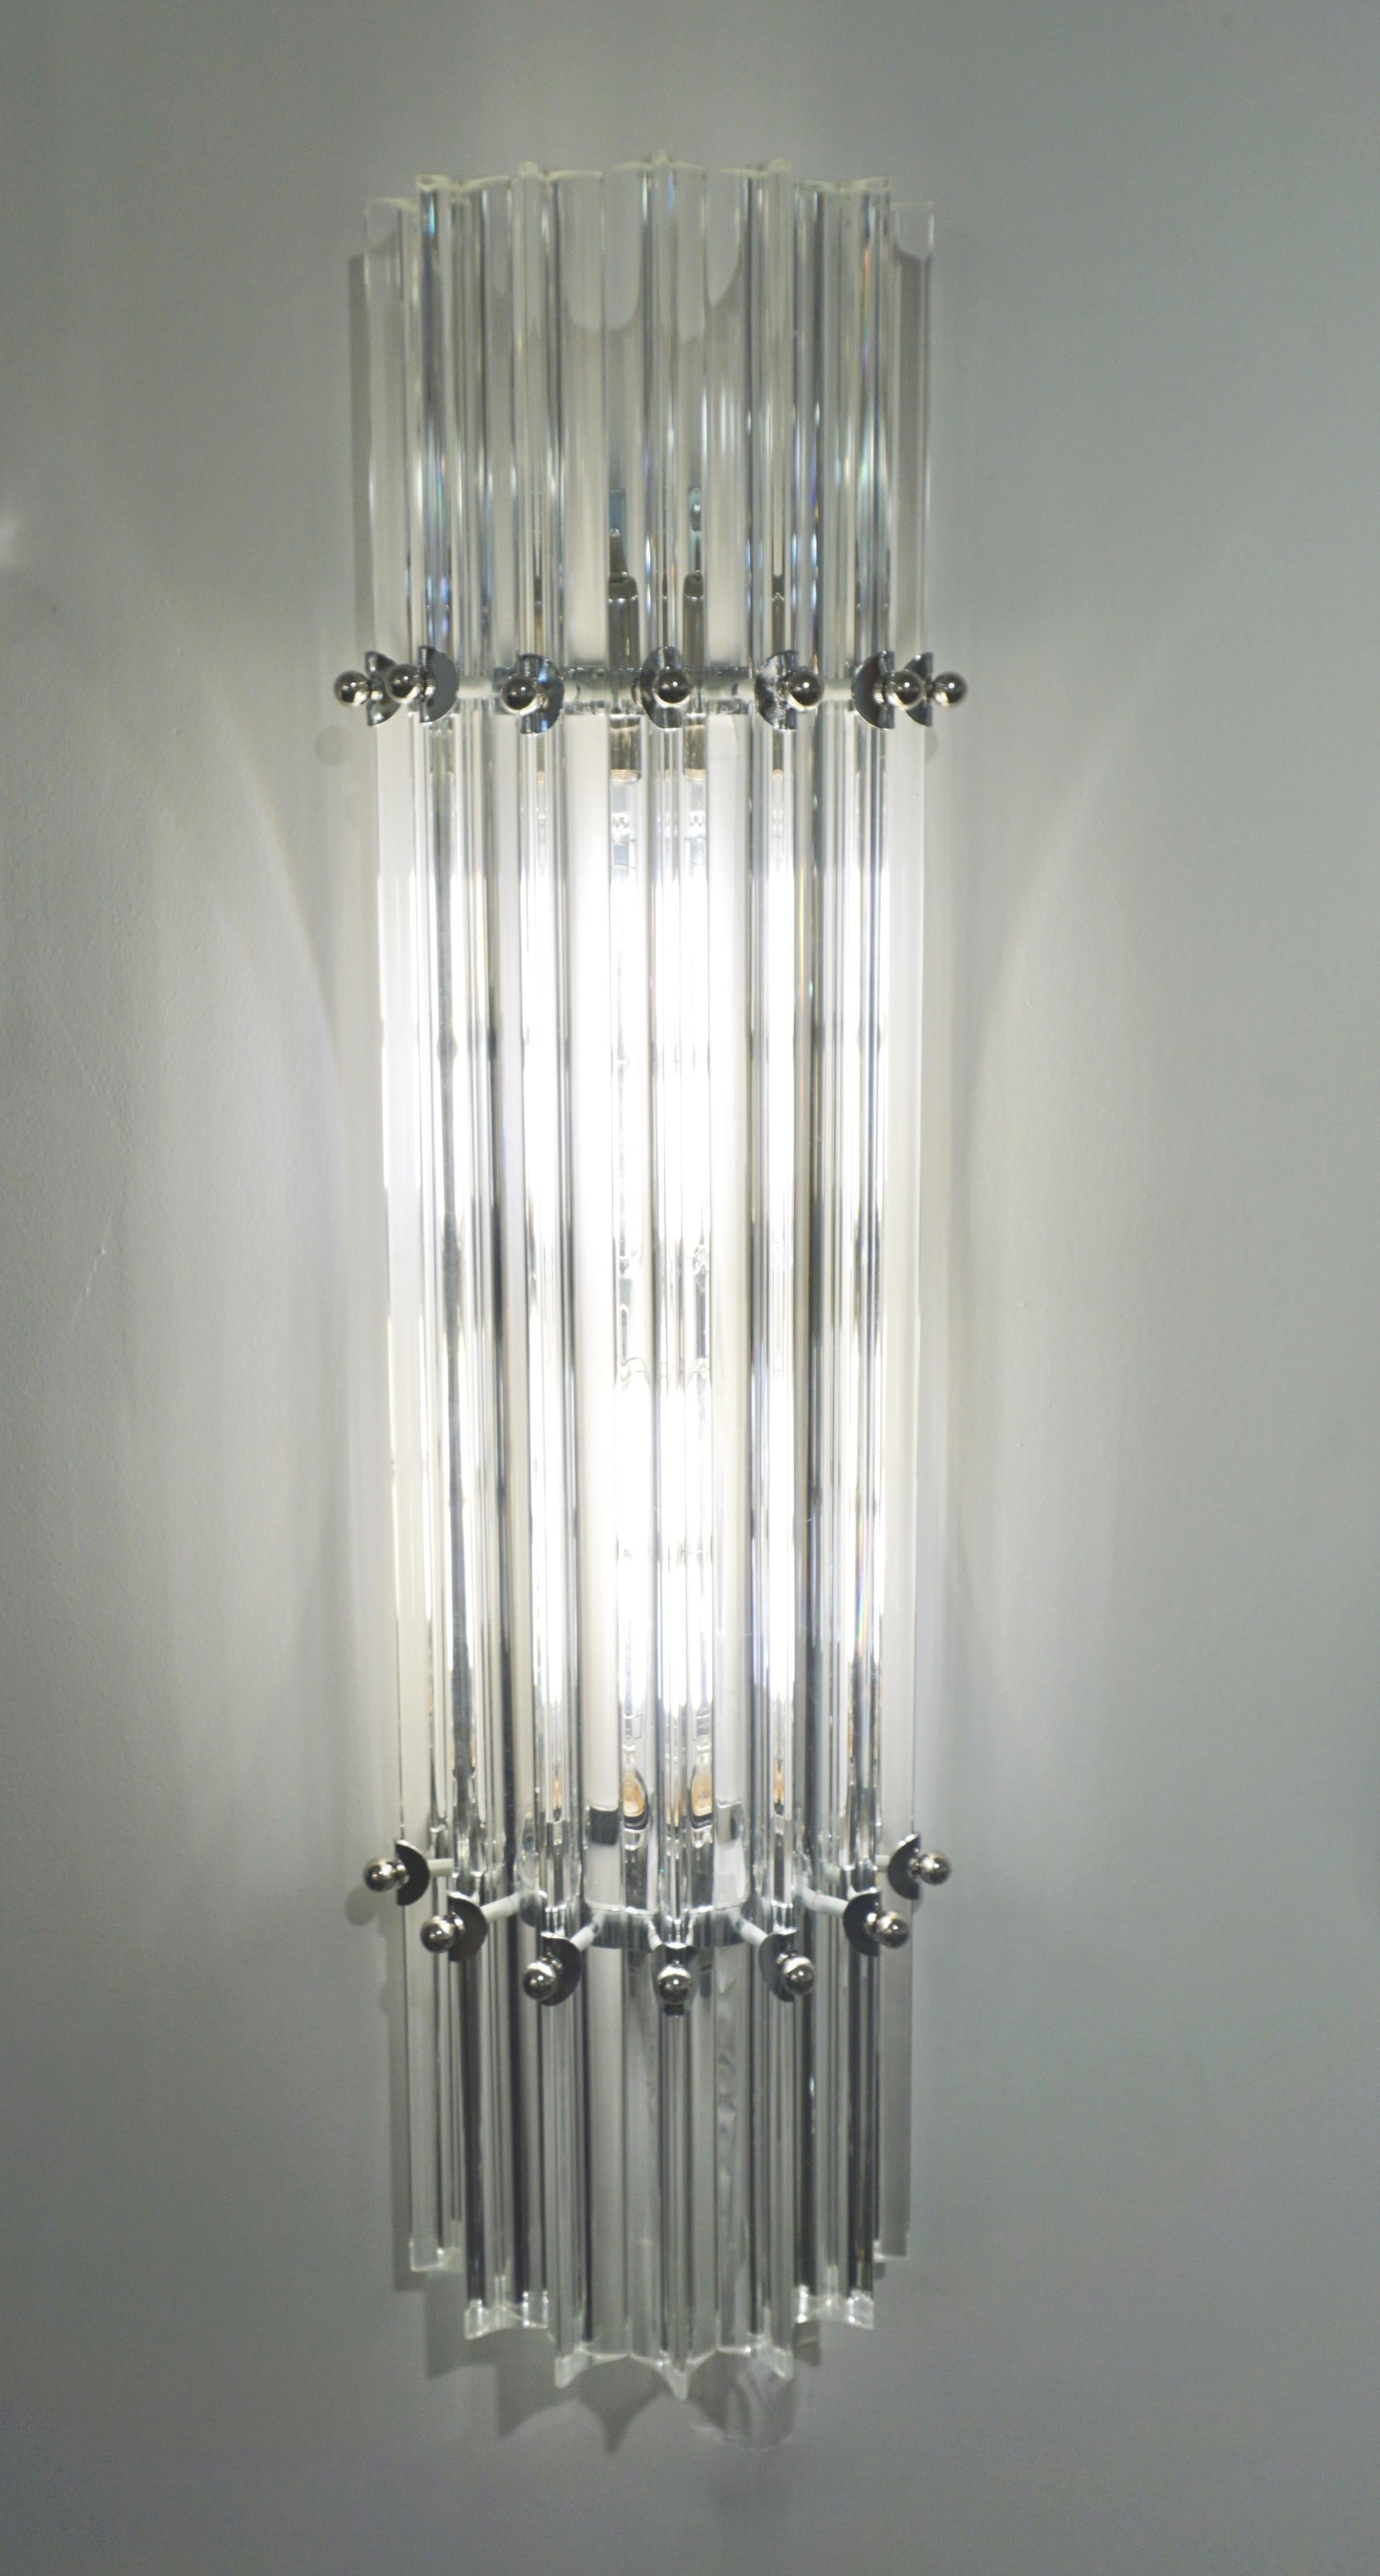 Very sleek custom Venetian sconce with organic minimalist design, consisting of seven straight crystal clear Murano glass rods of triangular section with amazing concave sides, that not only highlight the curved design but amplify the light